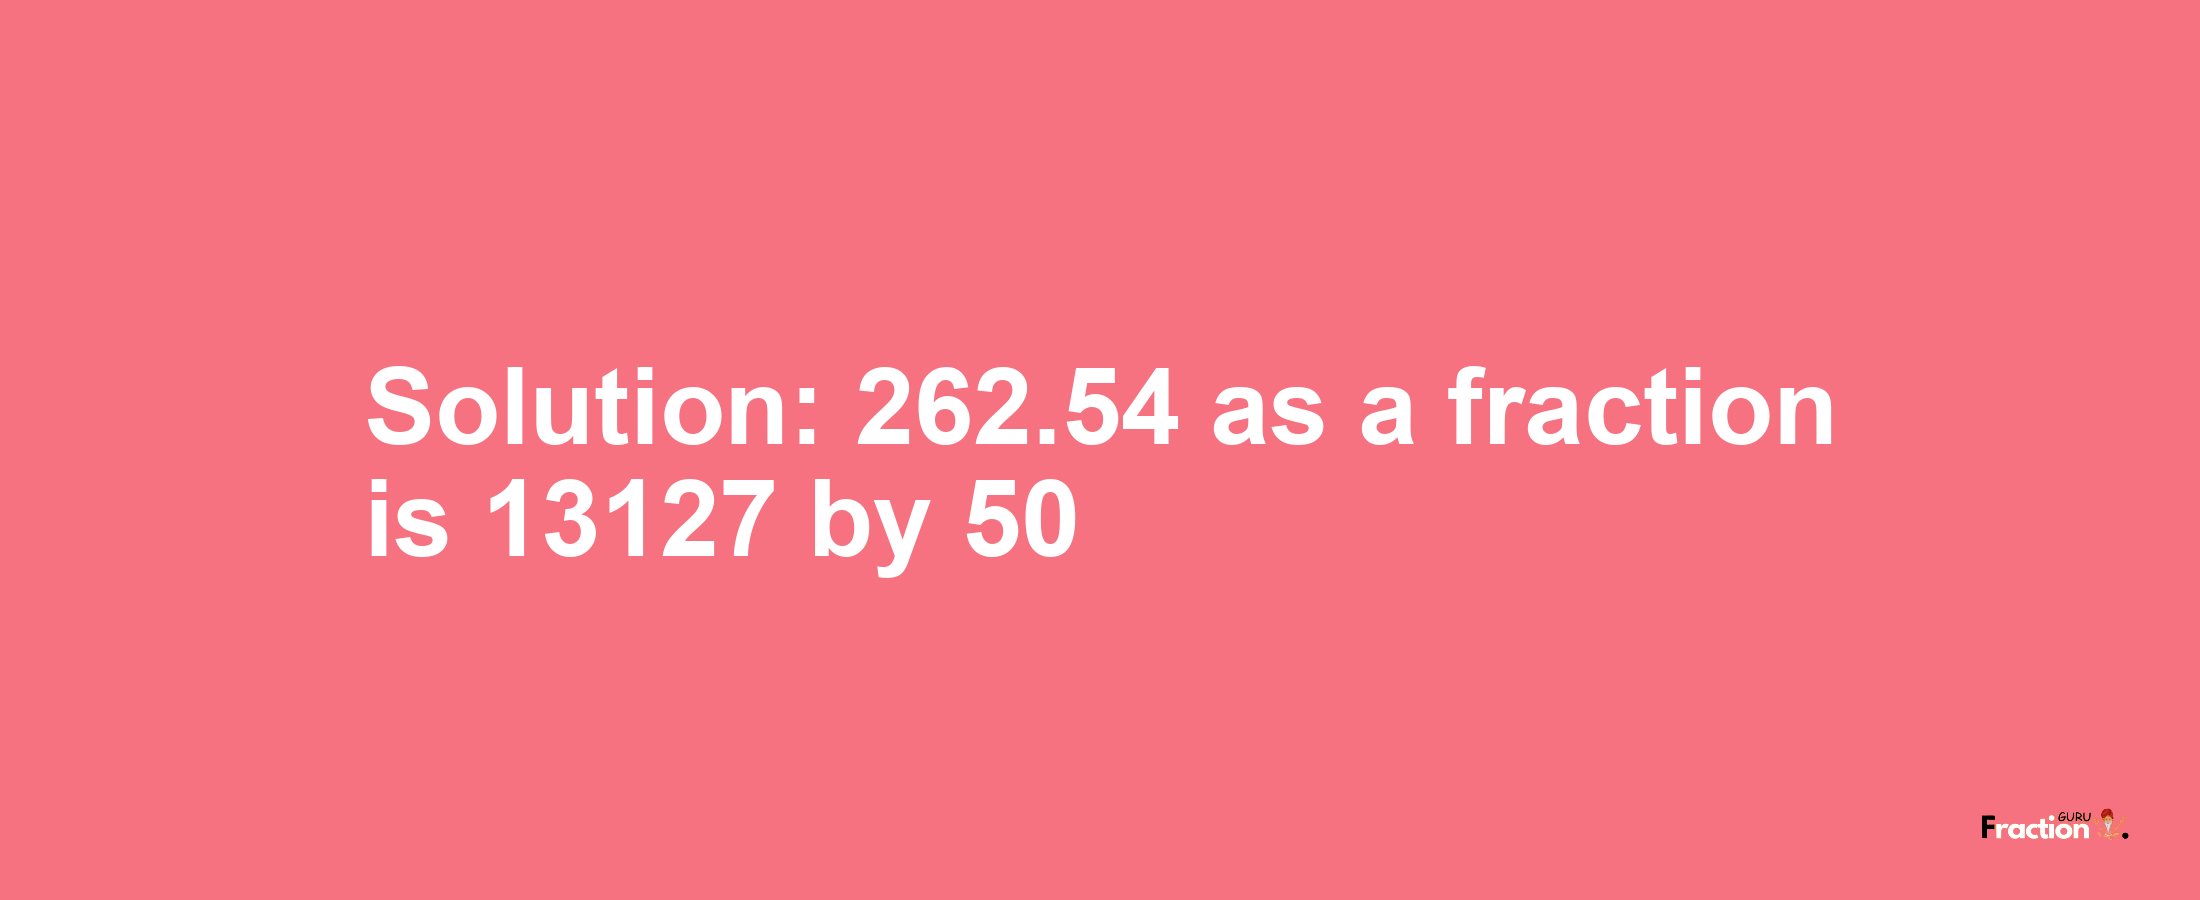 Solution:262.54 as a fraction is 13127/50